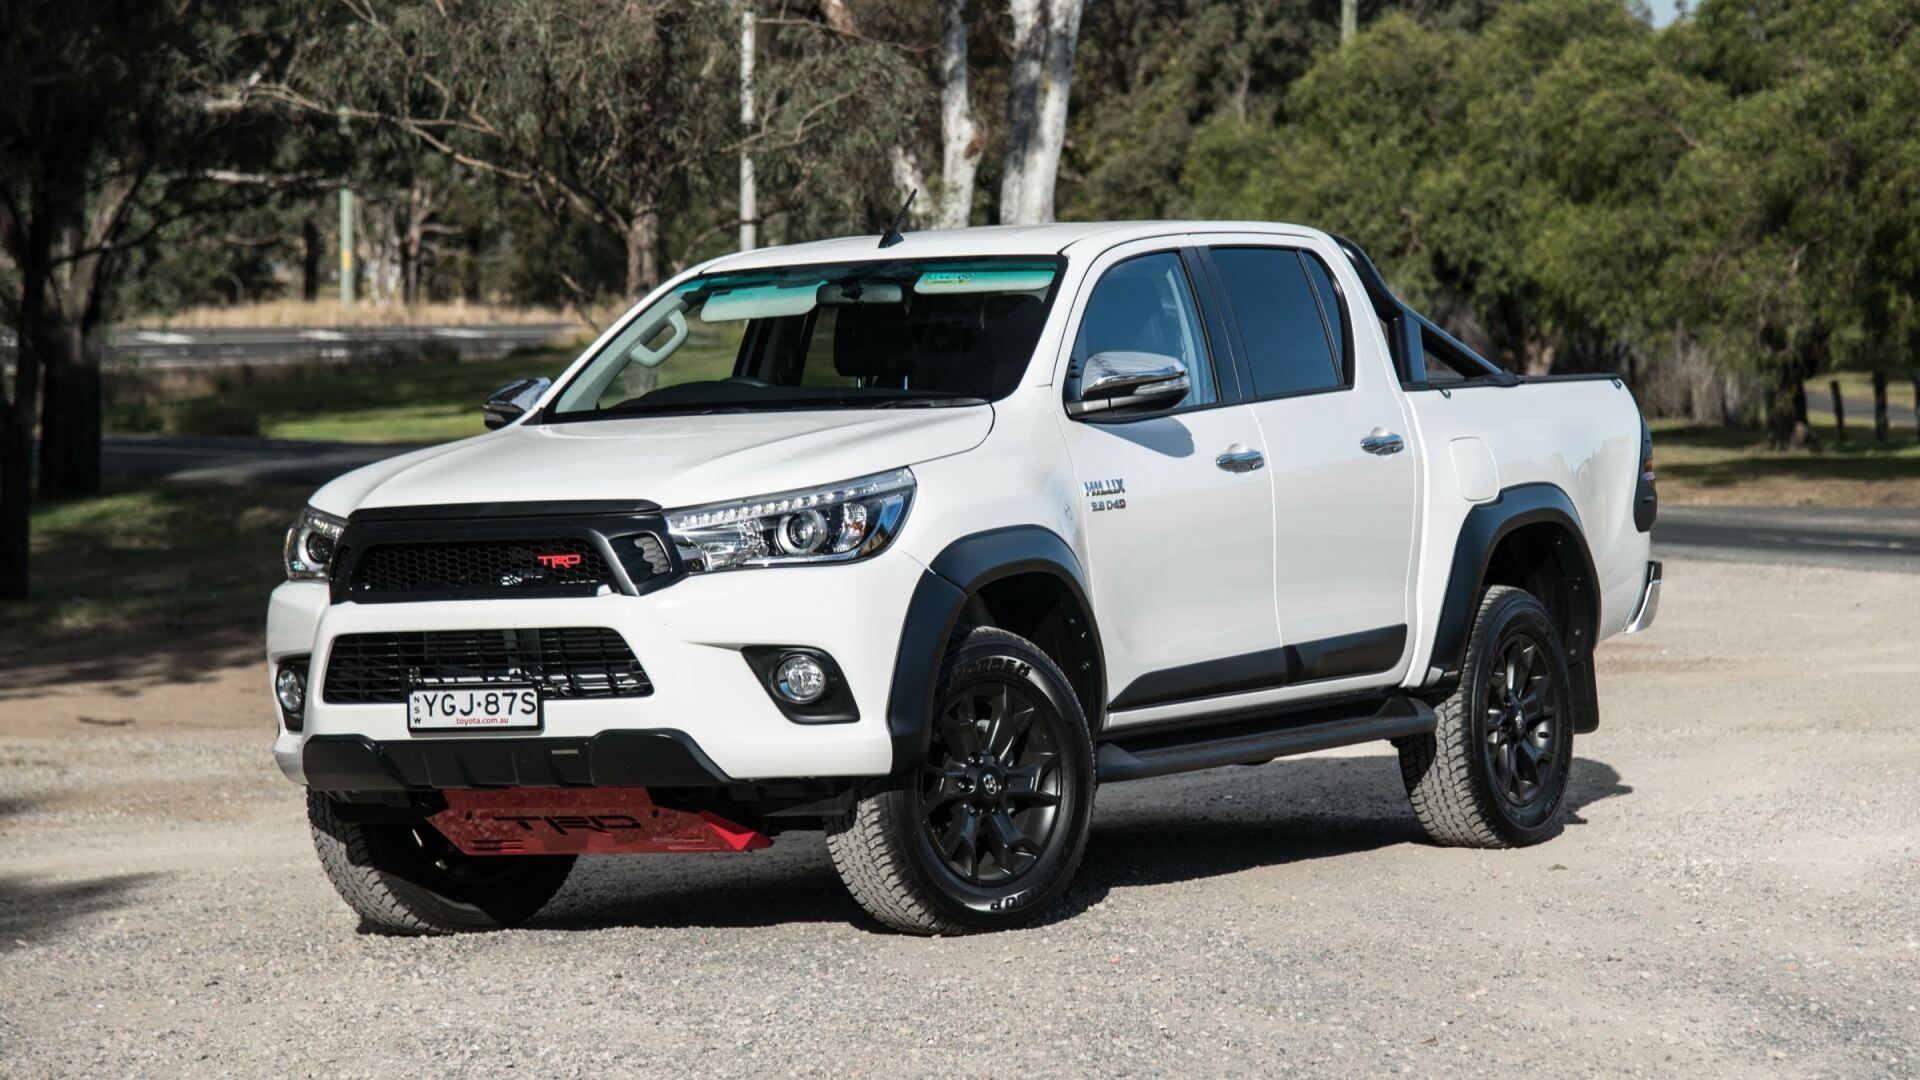 A White Toyota HiLux